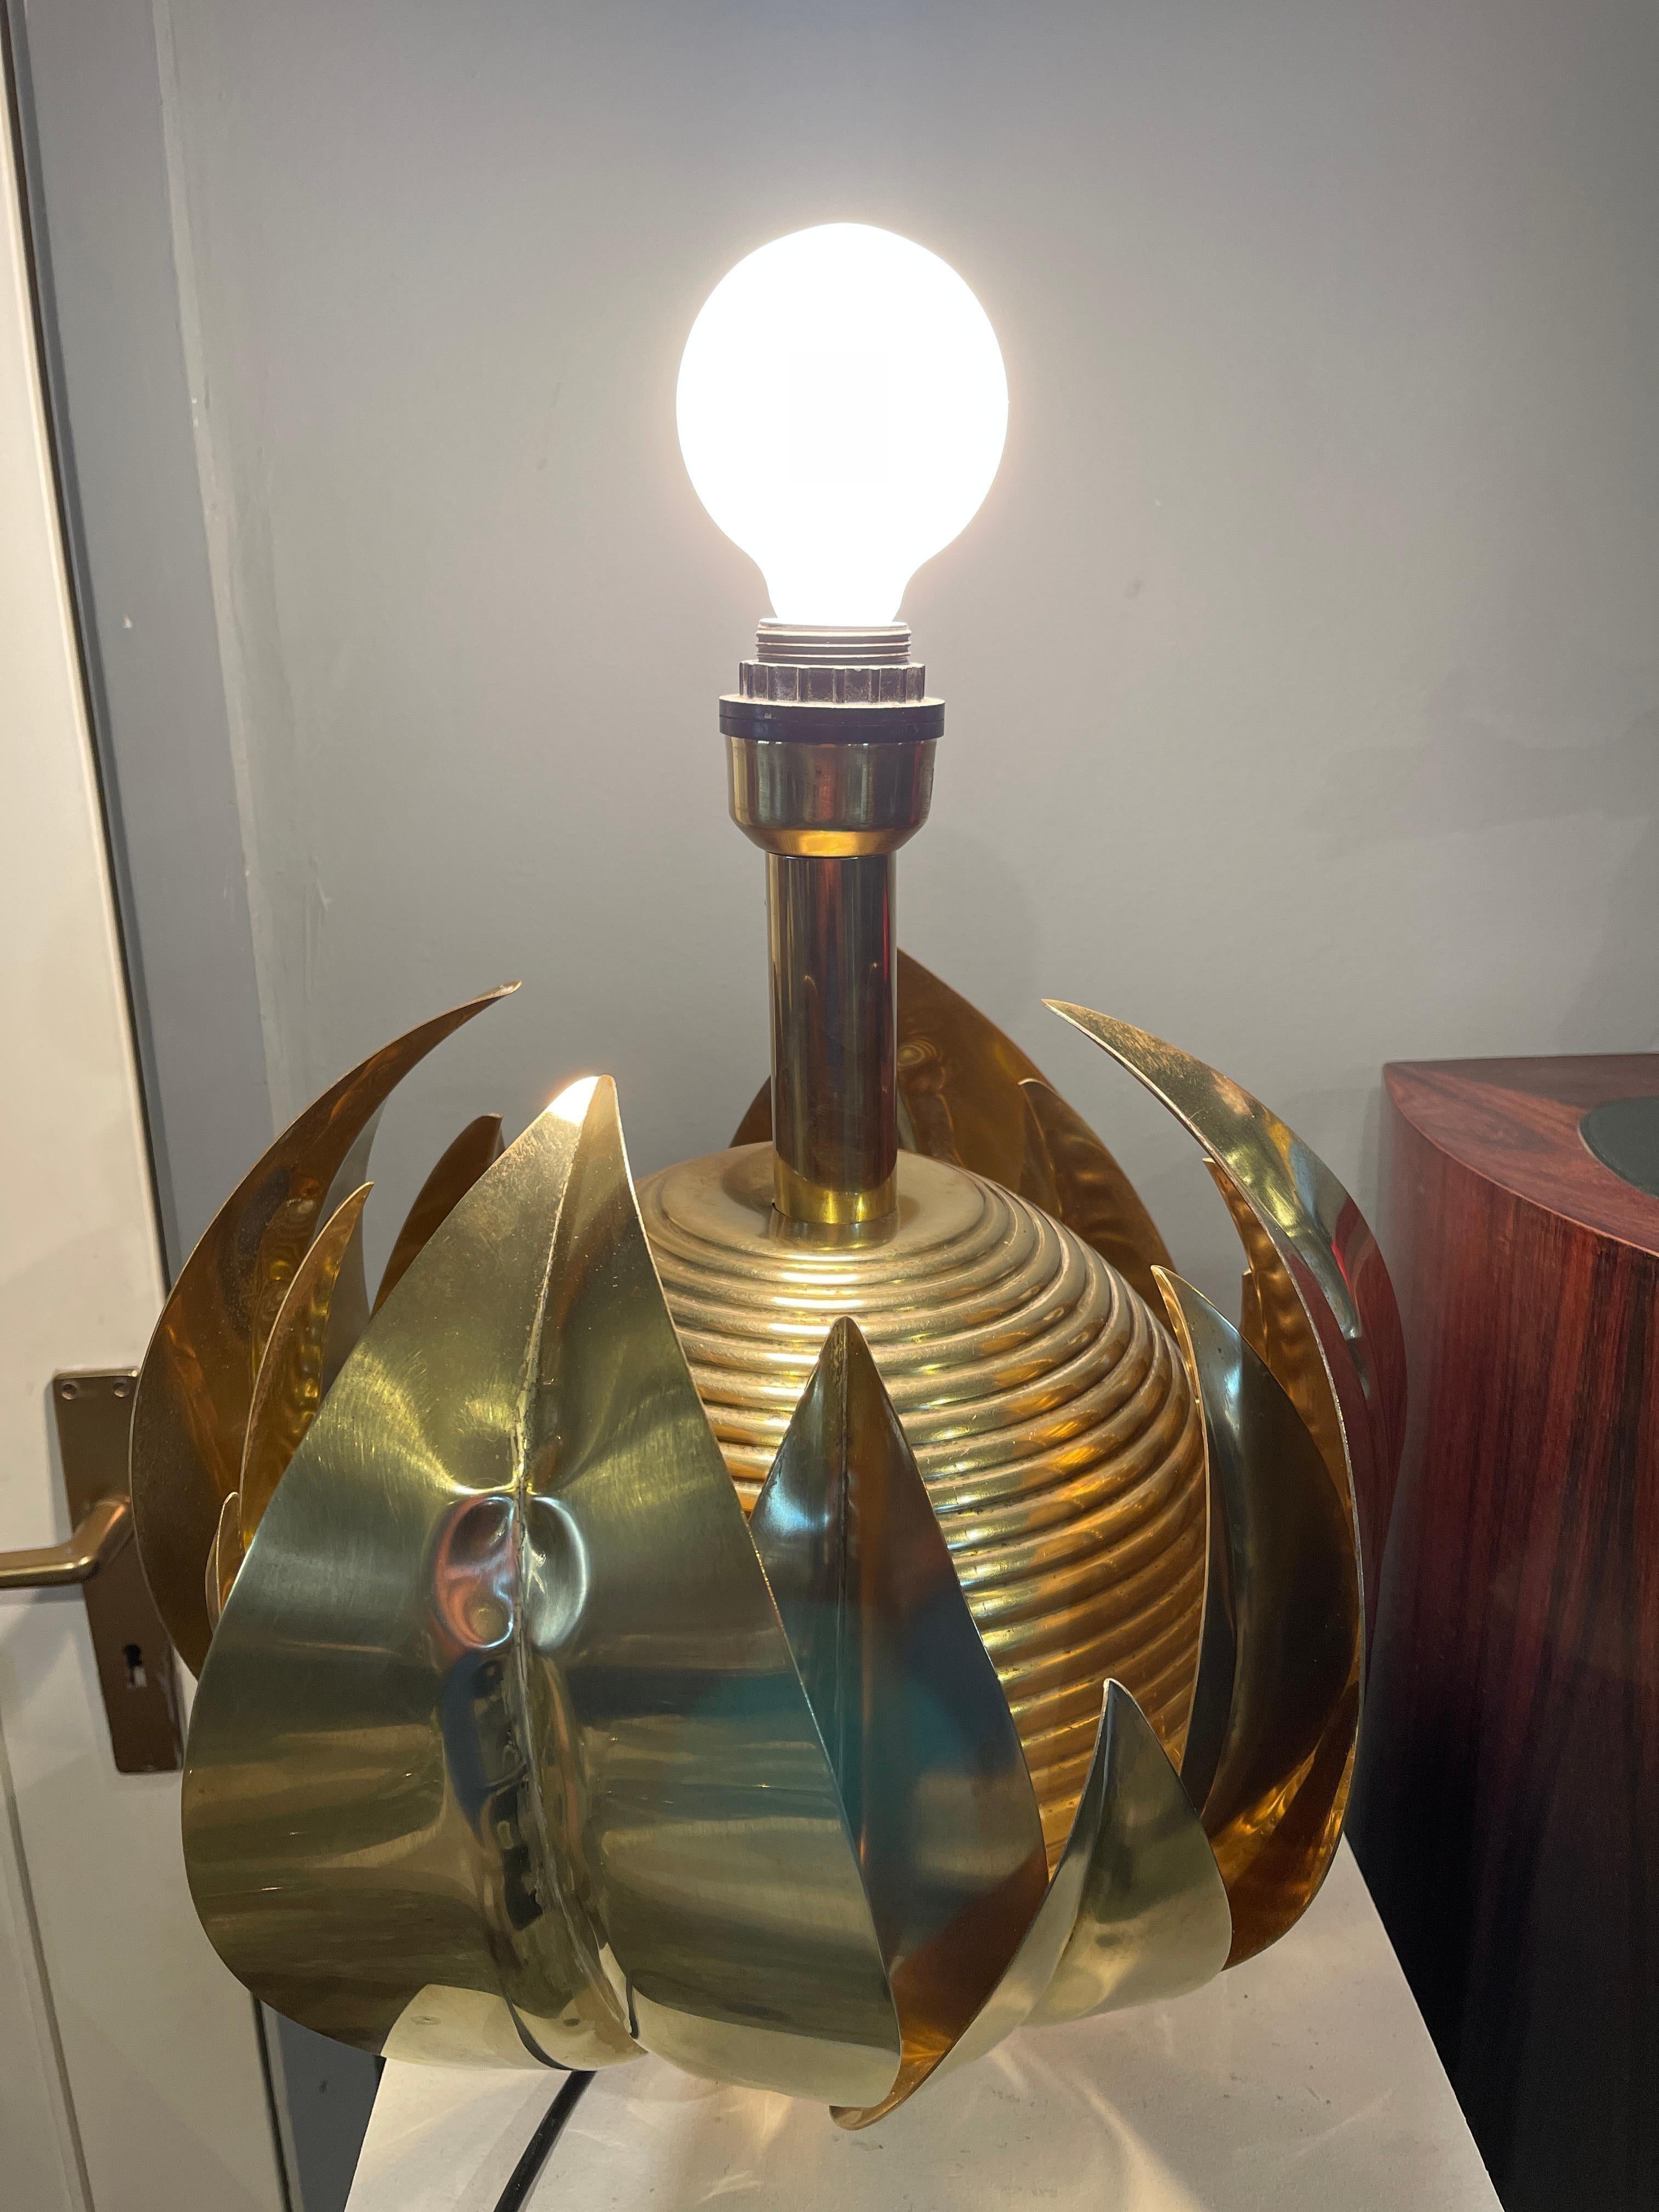 Artichoke-shaped lamp in brass, Italian production of the 1980s, attributable to the designer Tommaso Barbi.